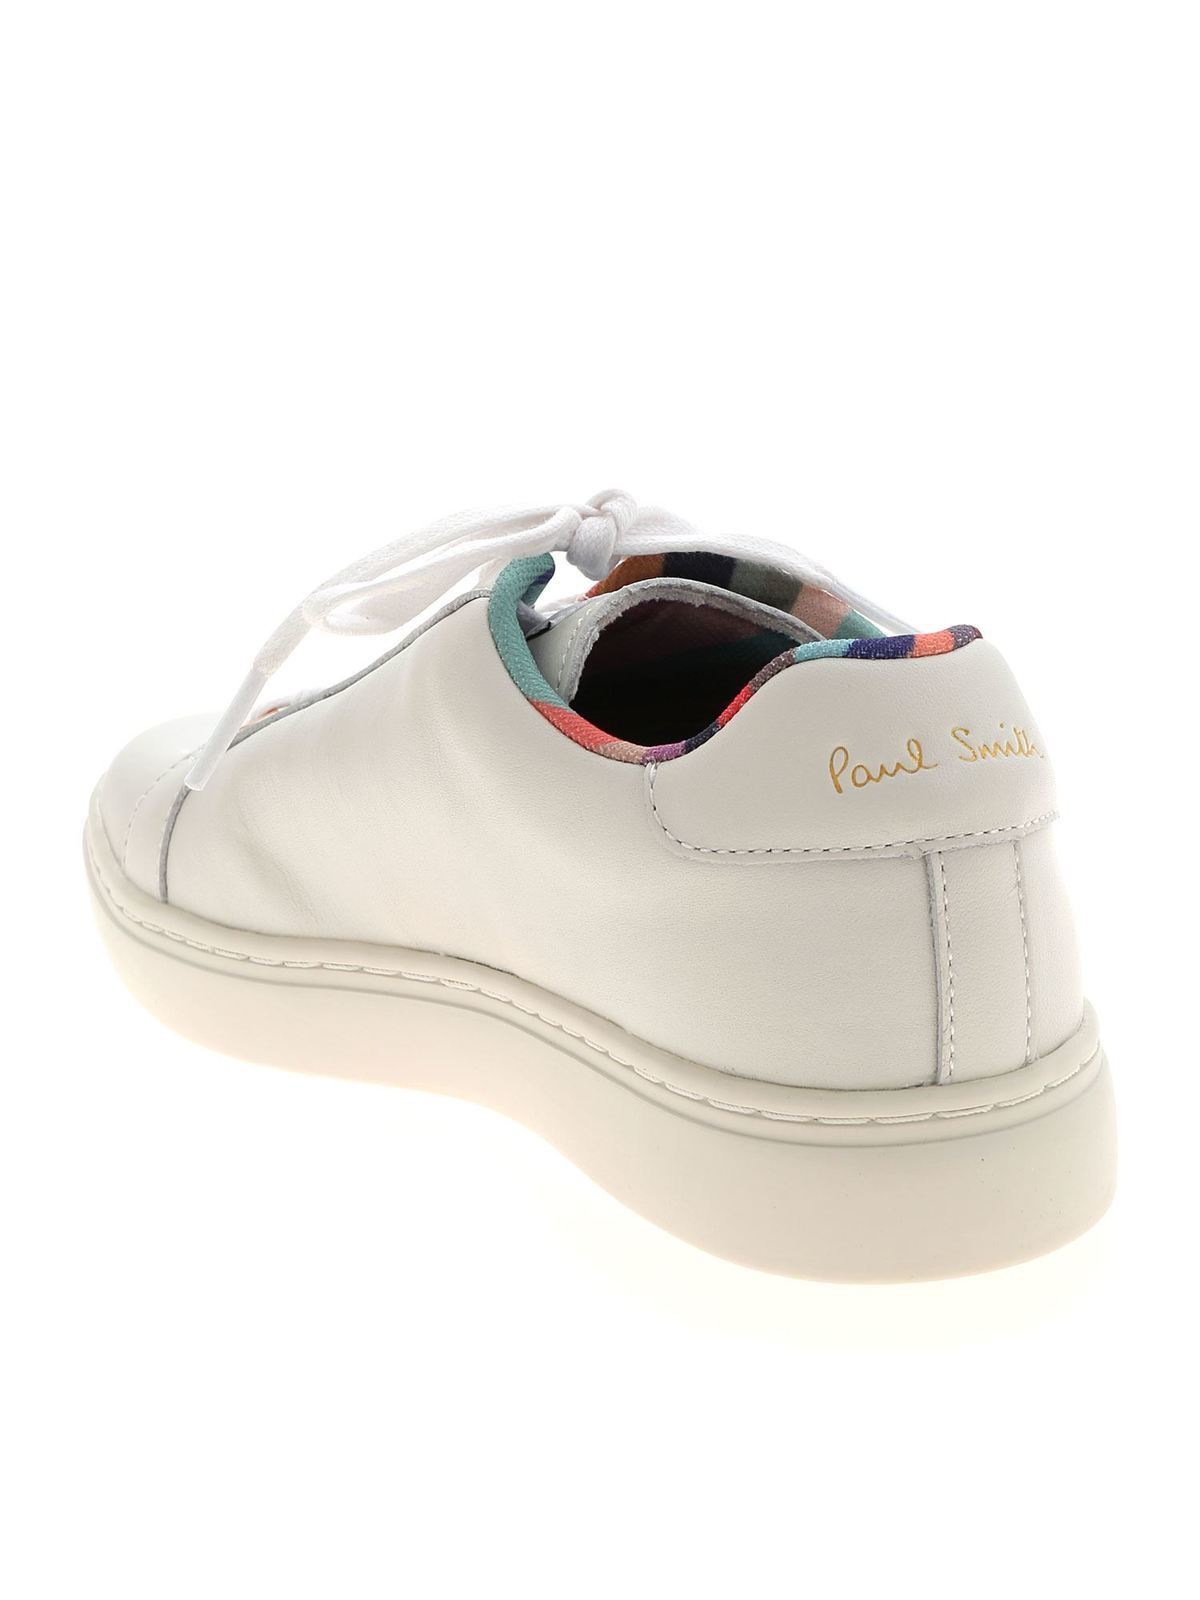 paul smith sneakers white